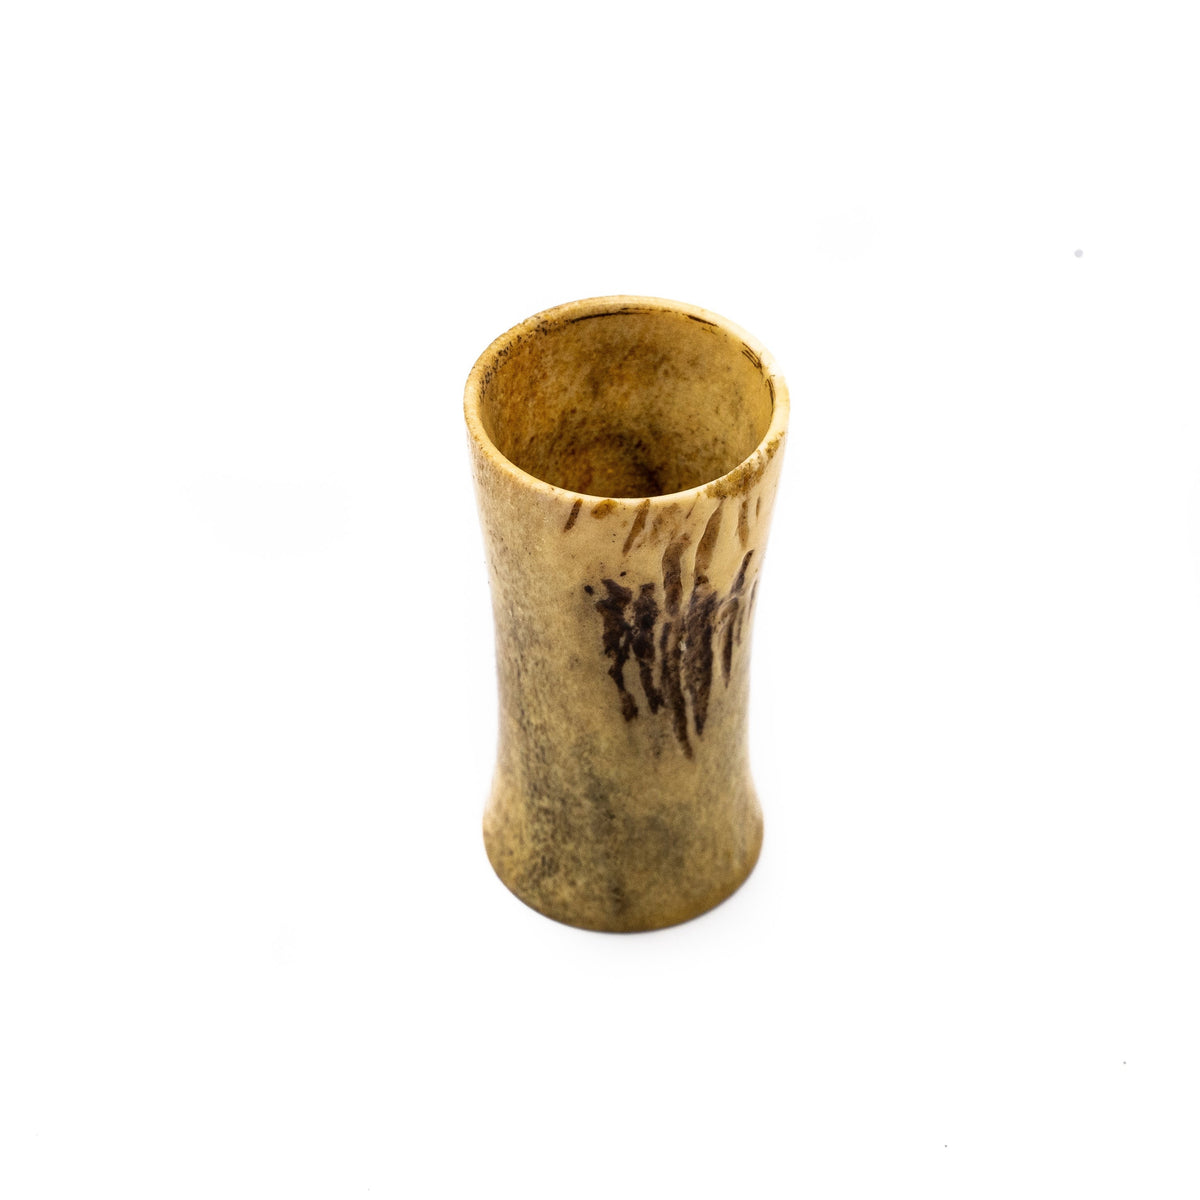 Real Antler Shot Glass - Handcrafted Grade A Moose Antler Shot Glass - Rustic Barware - Outdoor Lifestyle - Gift for Him